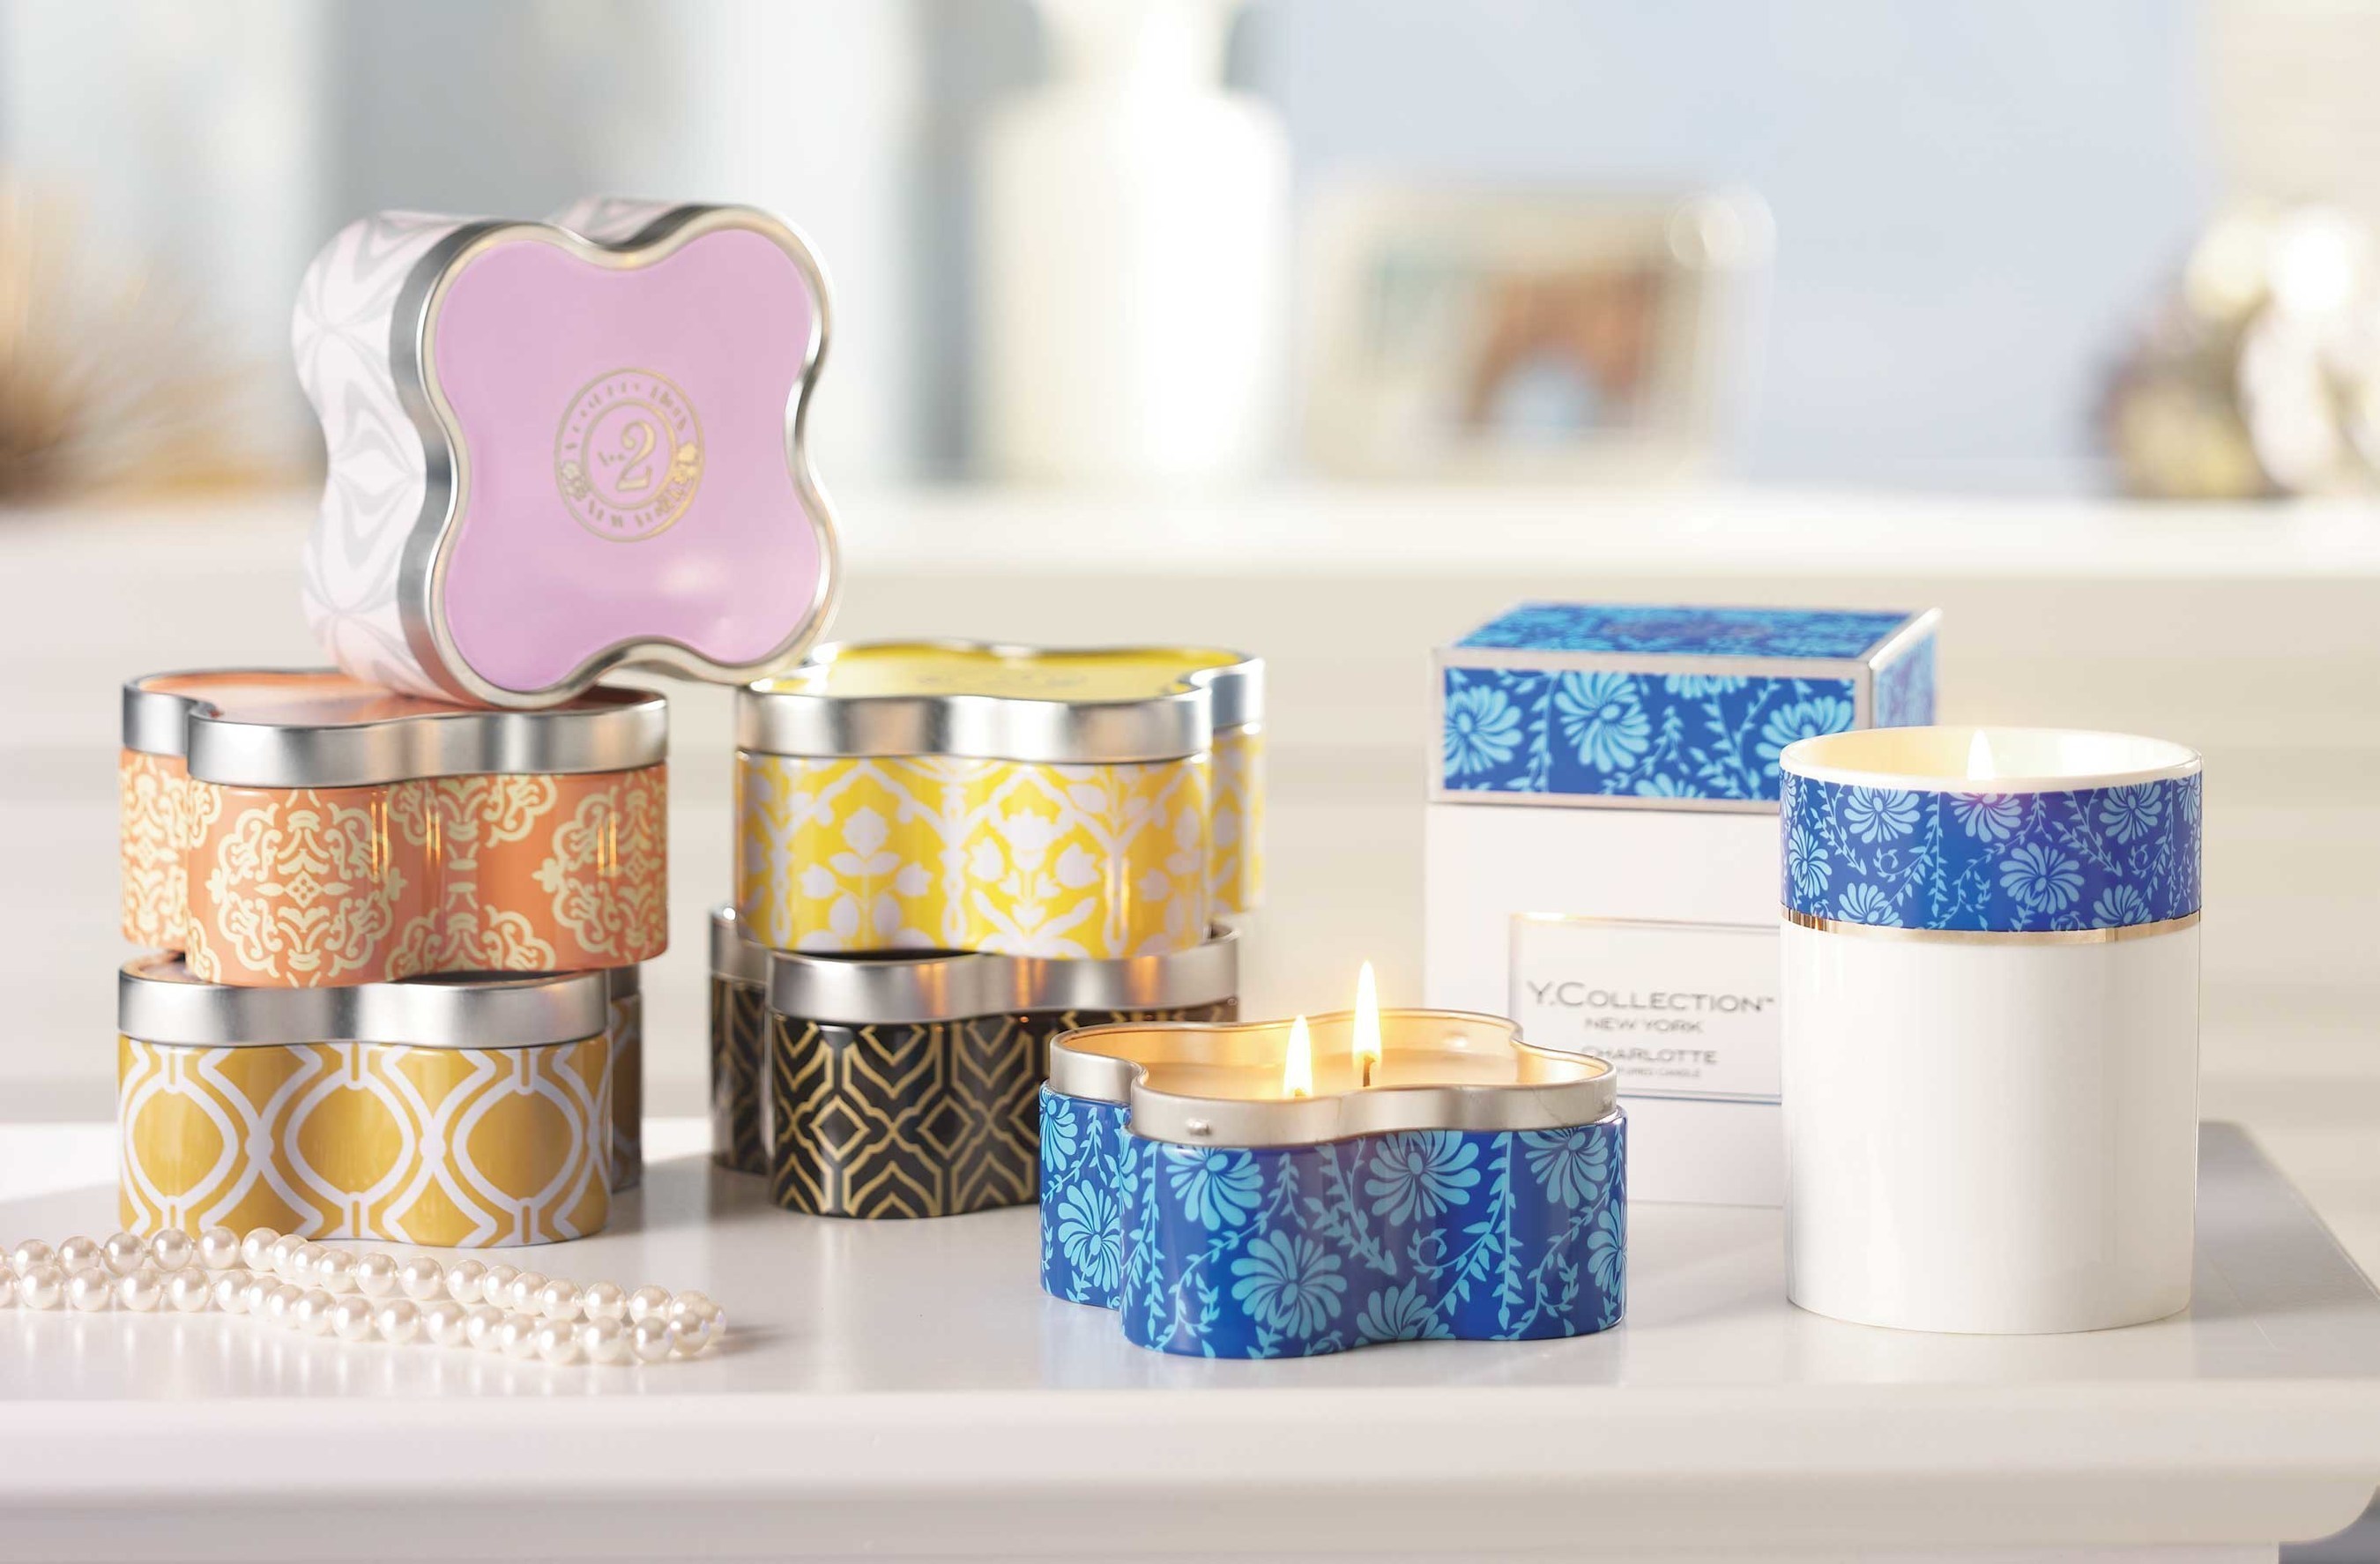 Yankee Candle's premium Y. Collection No. 2, available in eight fragrances hand-poured into two sophisticated new forms.